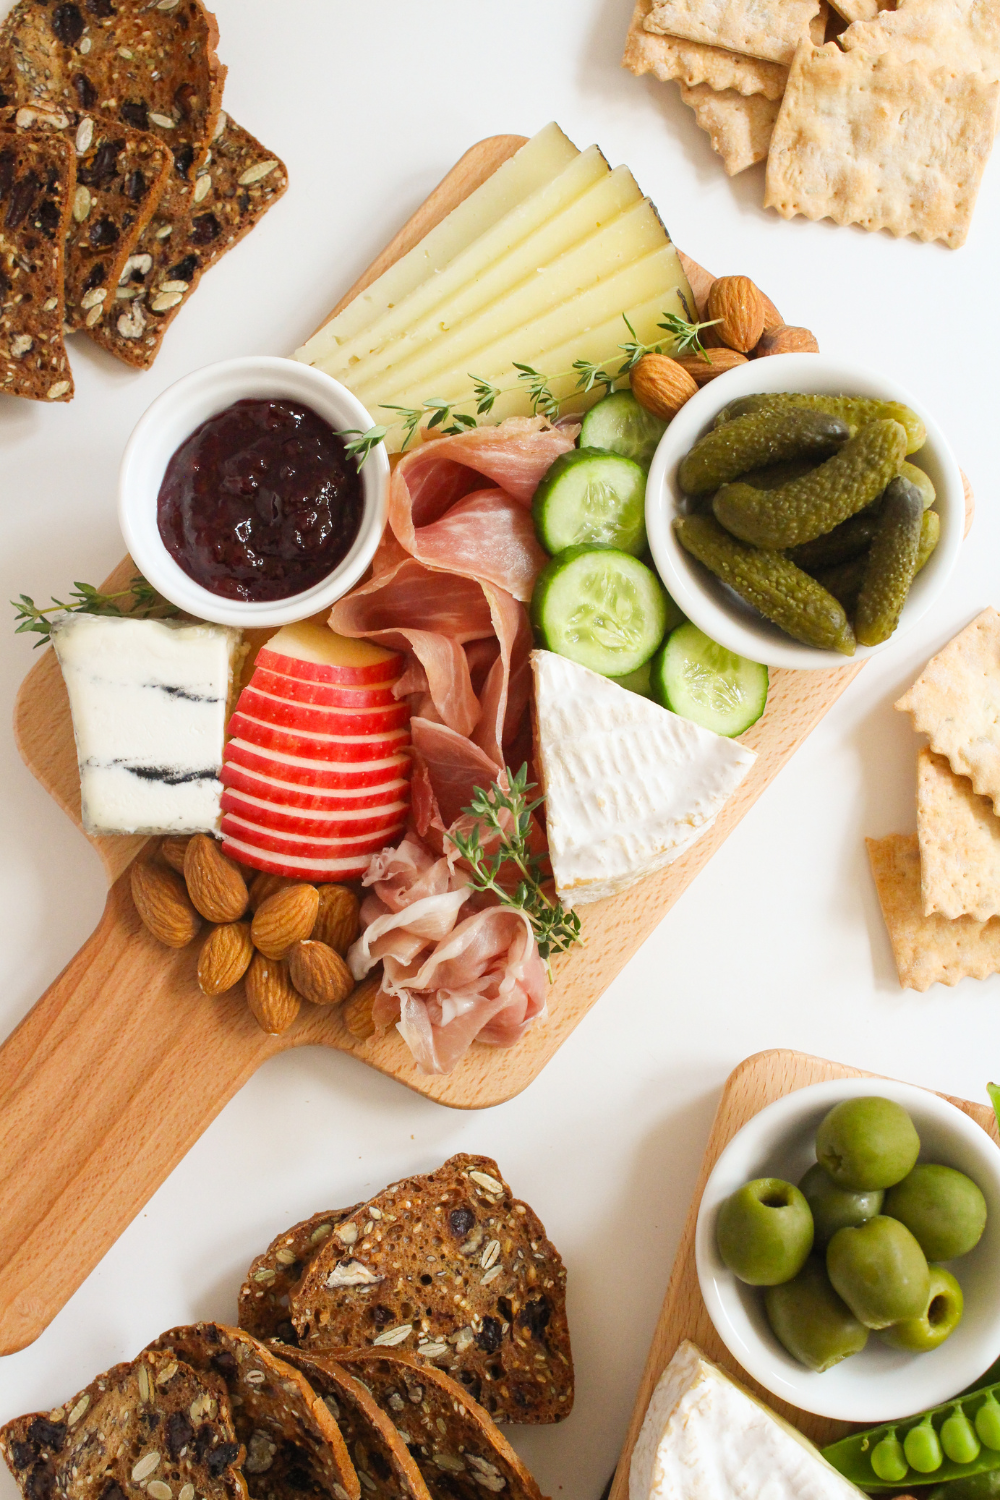 https://www.fannetasticfood.com/wp-content/uploads/2022/09/Small-Charcuterie-Board-2.png